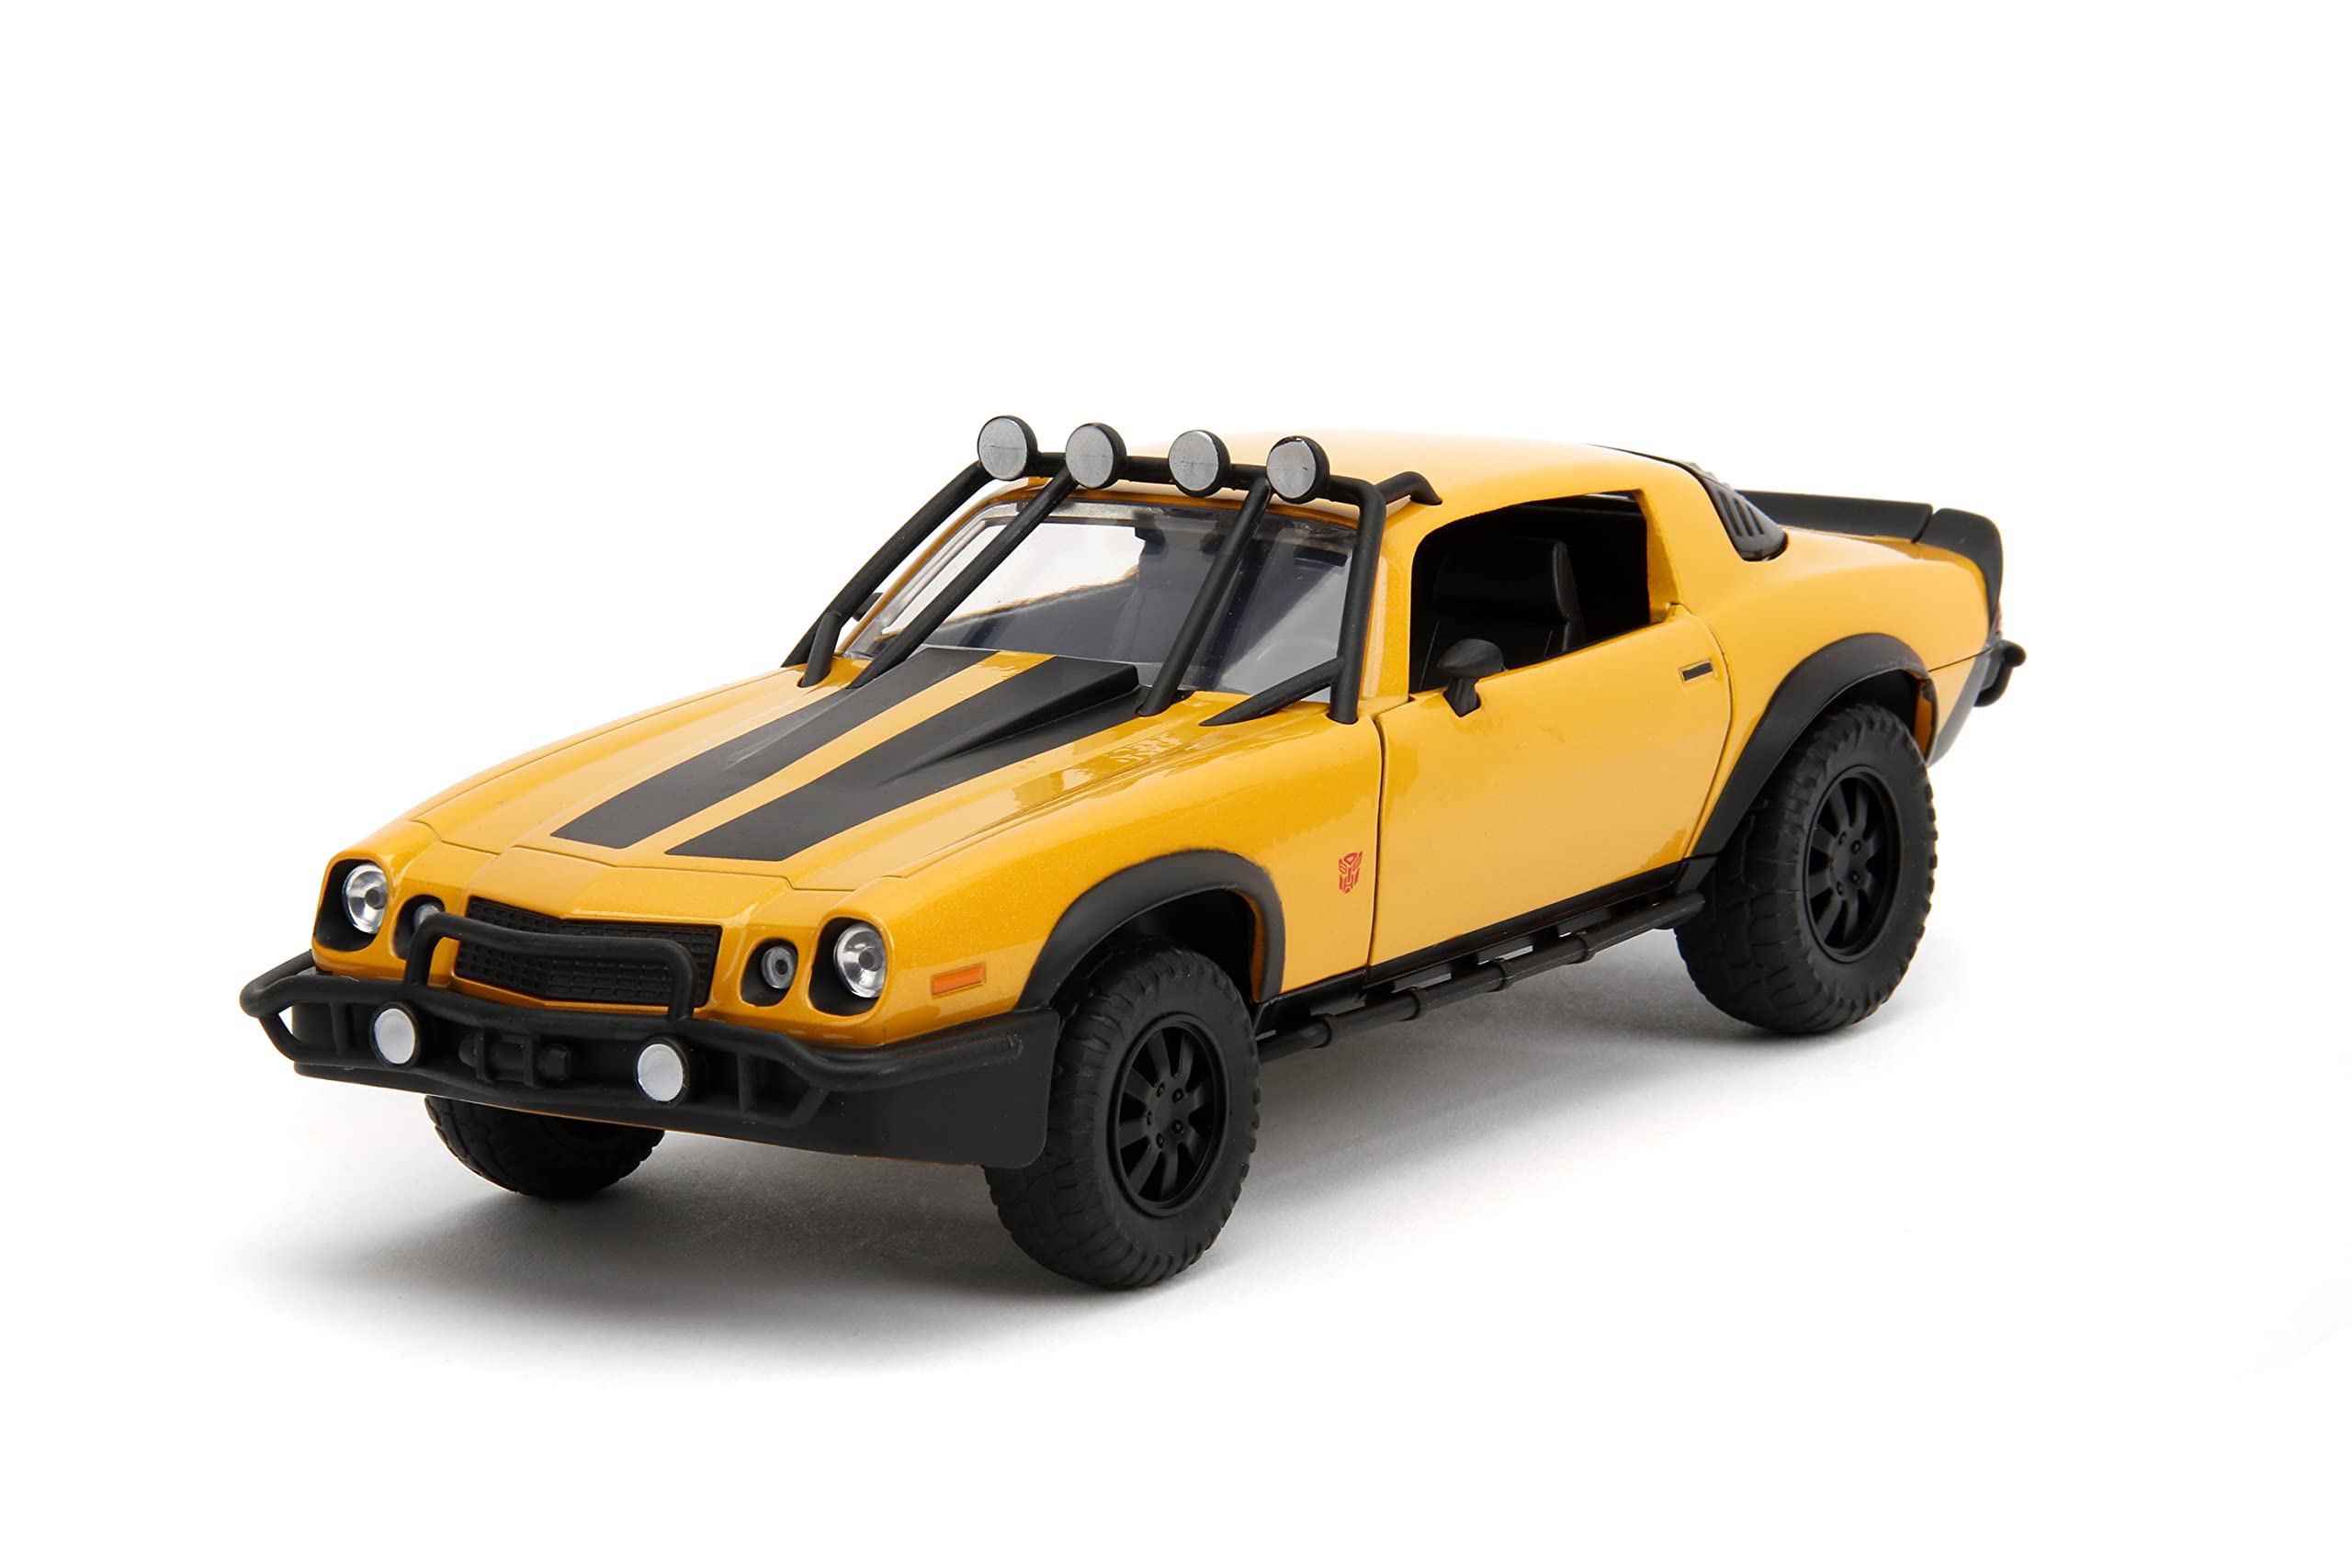 Transformers Rise of The Beast 1:24 1977 Chevy Camaro Bumblebee & Badge Die-Cast Car, Toys for Kids and Adults